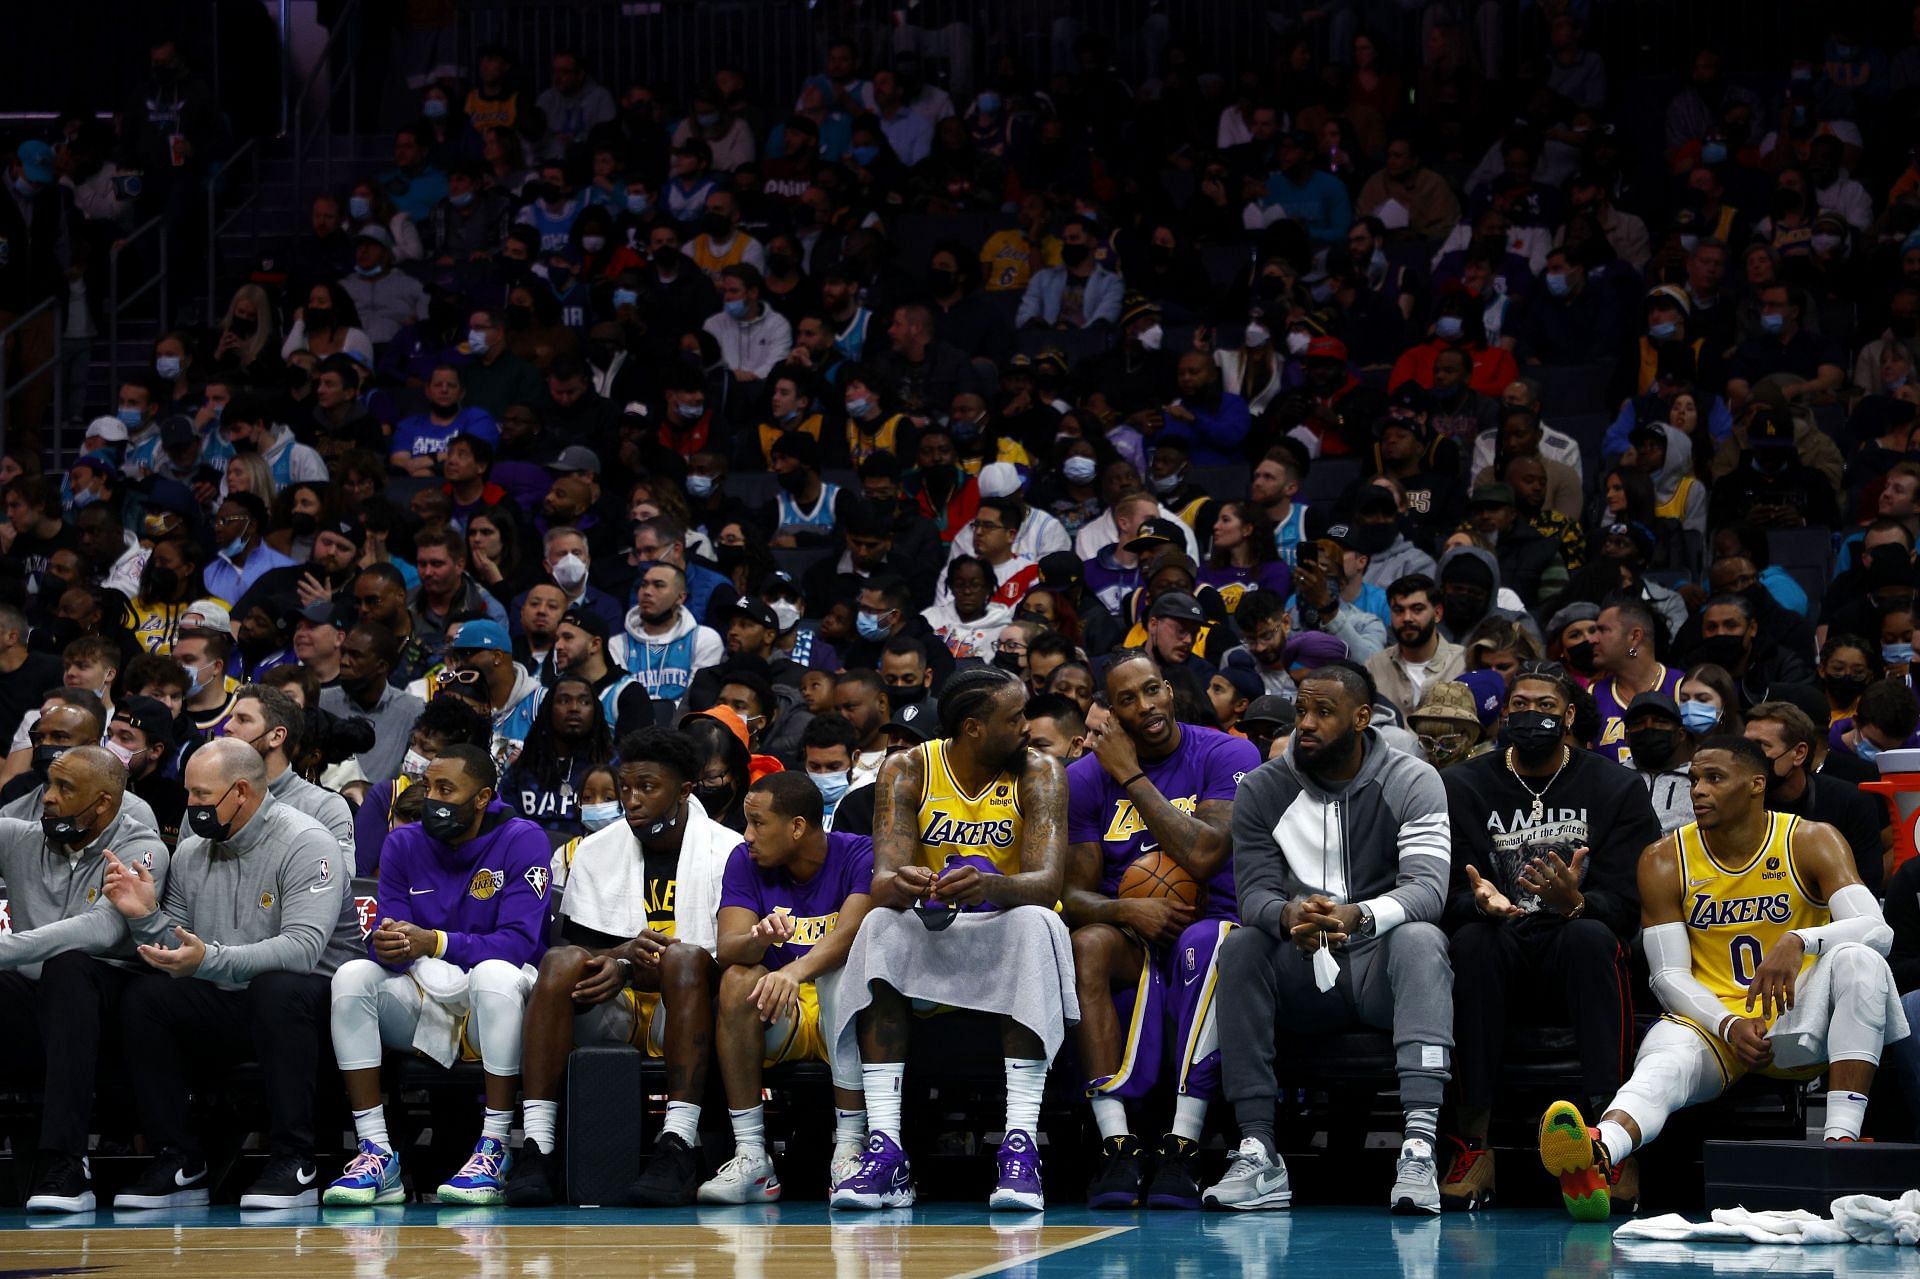 LA Lakers look on at a game against the Charlotte Hornets